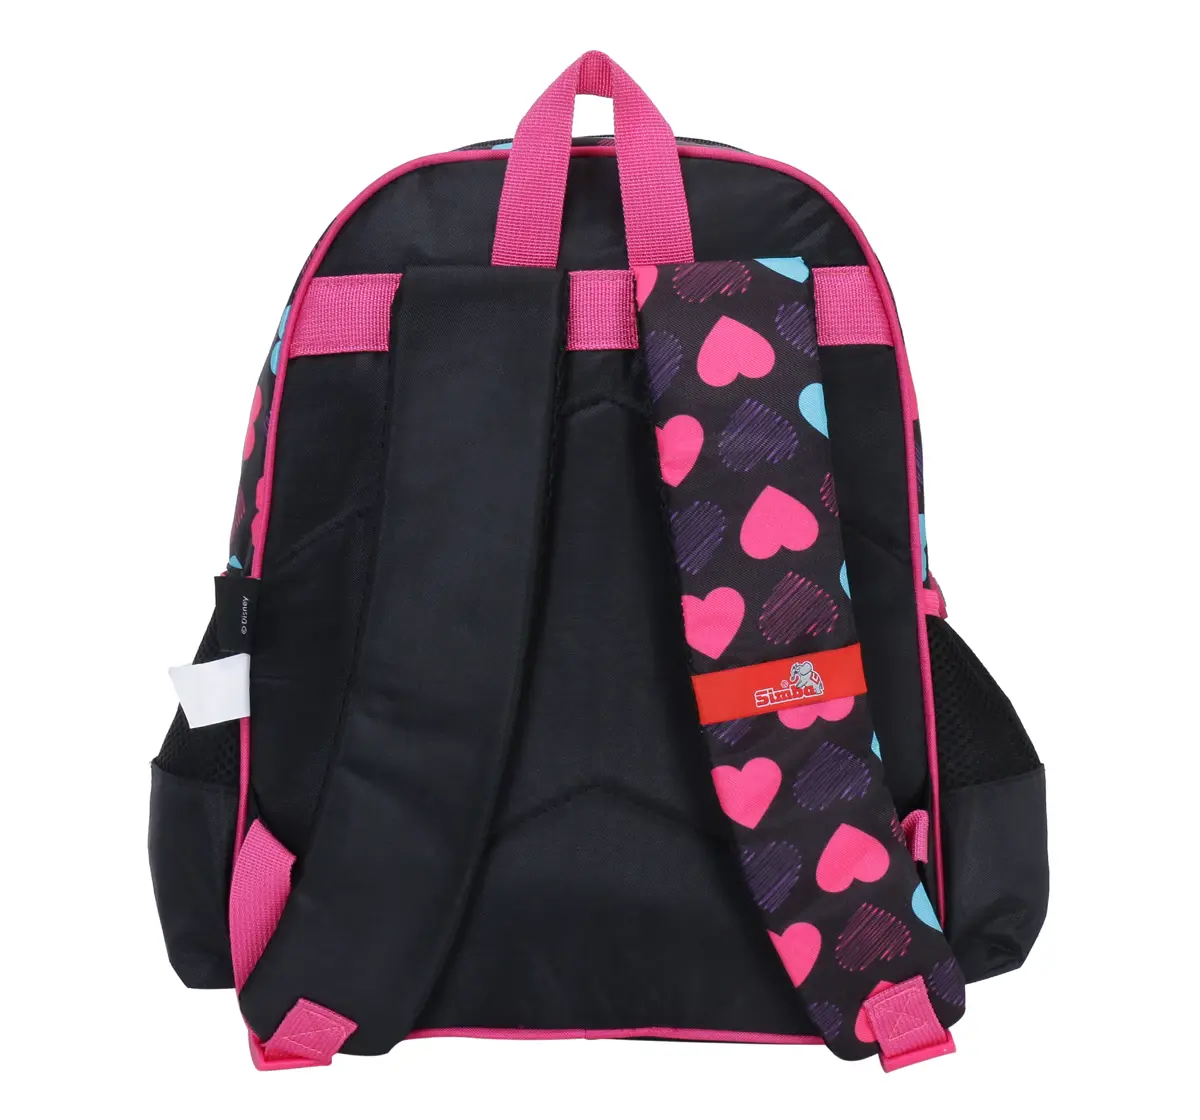 Simba Minnie Sweety Hearts 16 Backpack Multicolor 3Y+